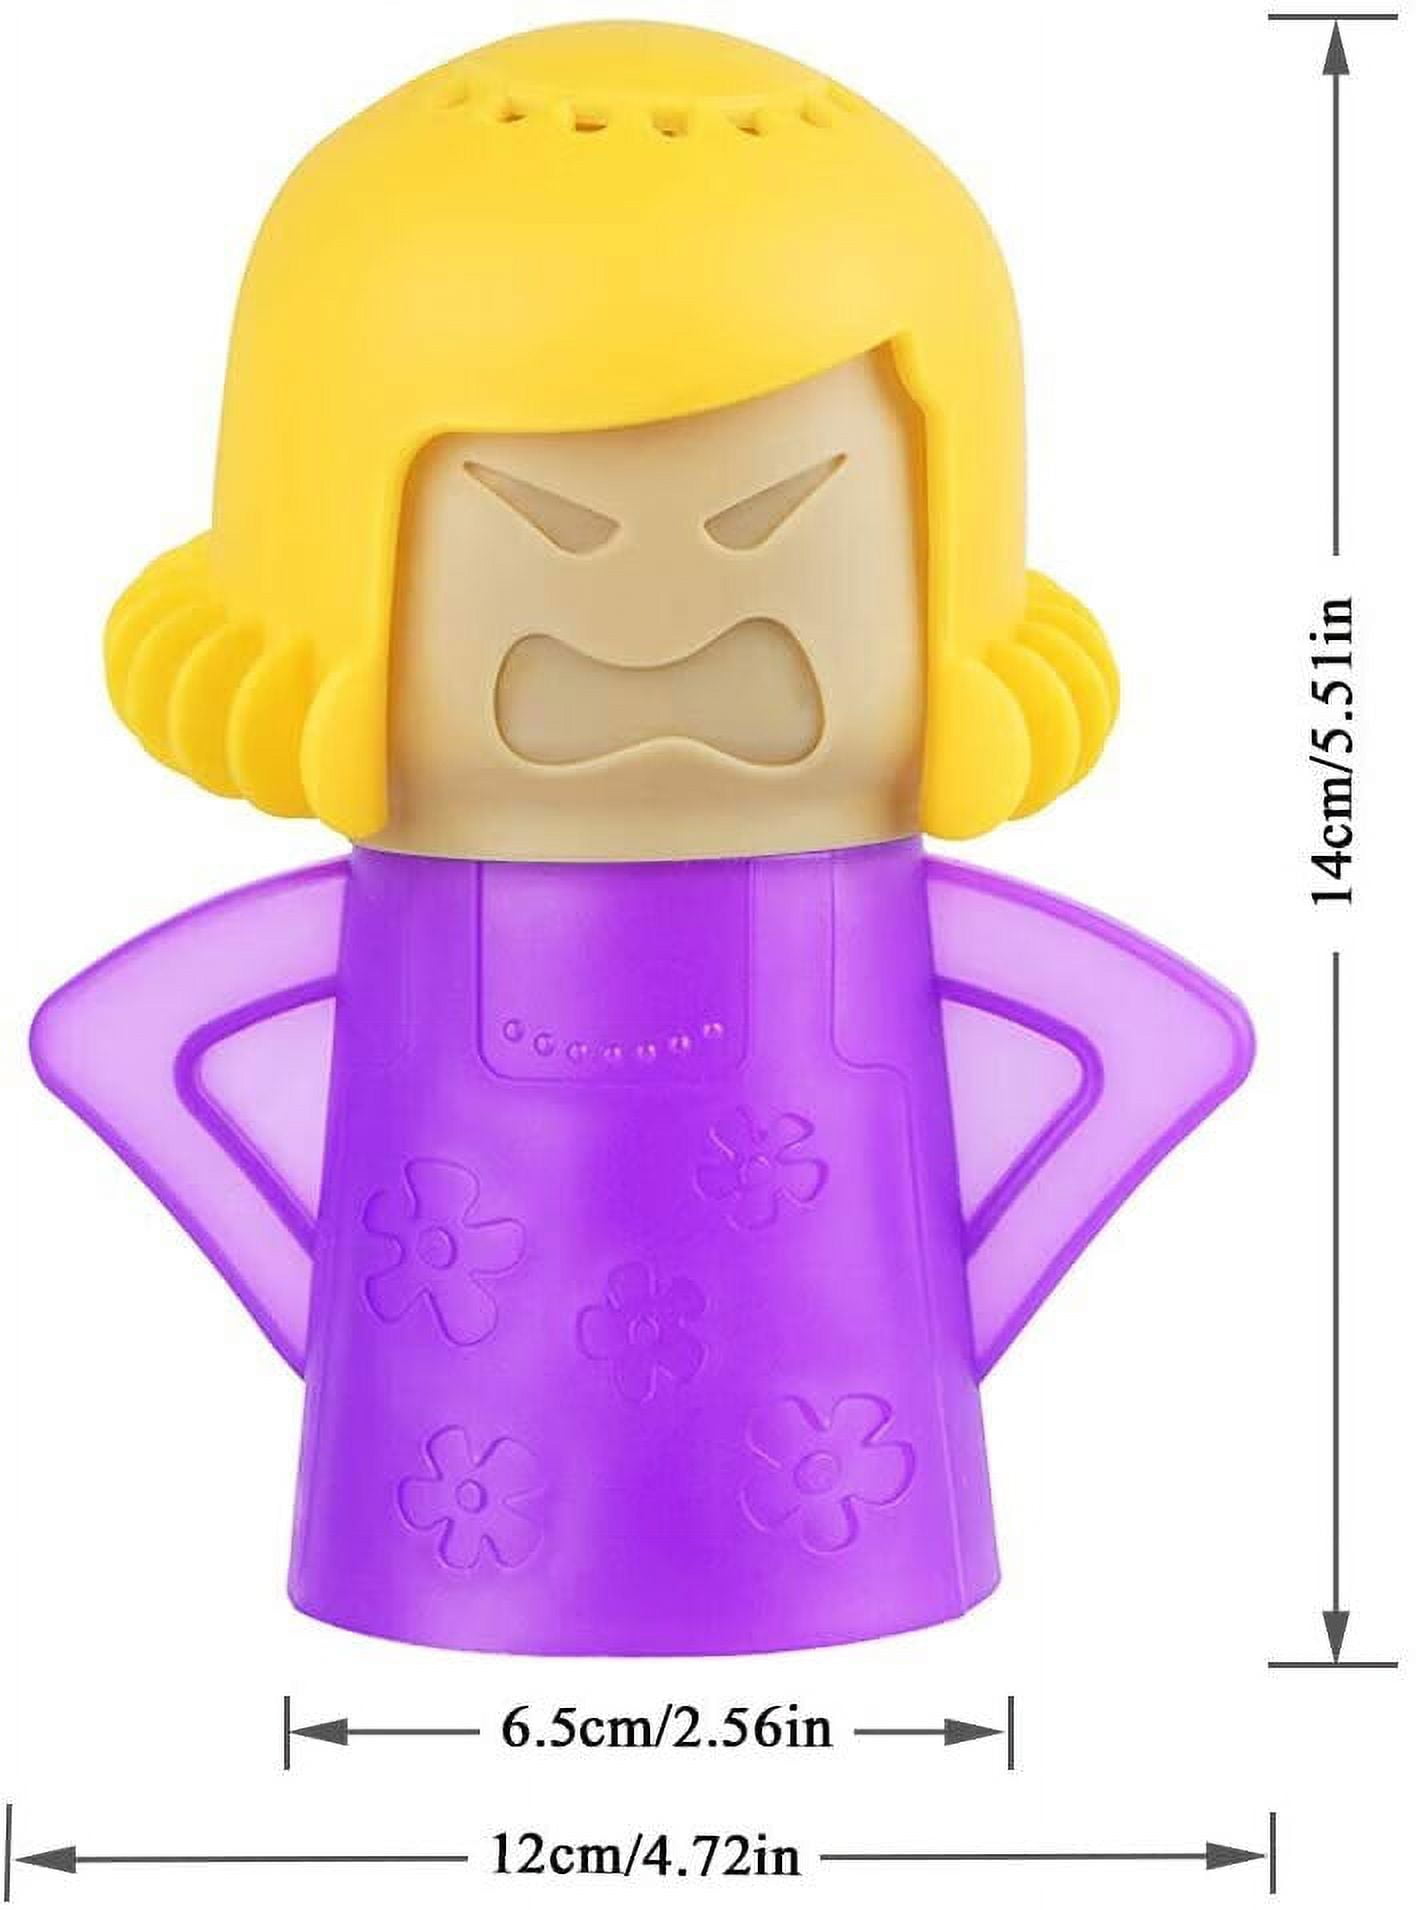 Angry Mom Microwave Cleaner - Purple, 1 - City Market